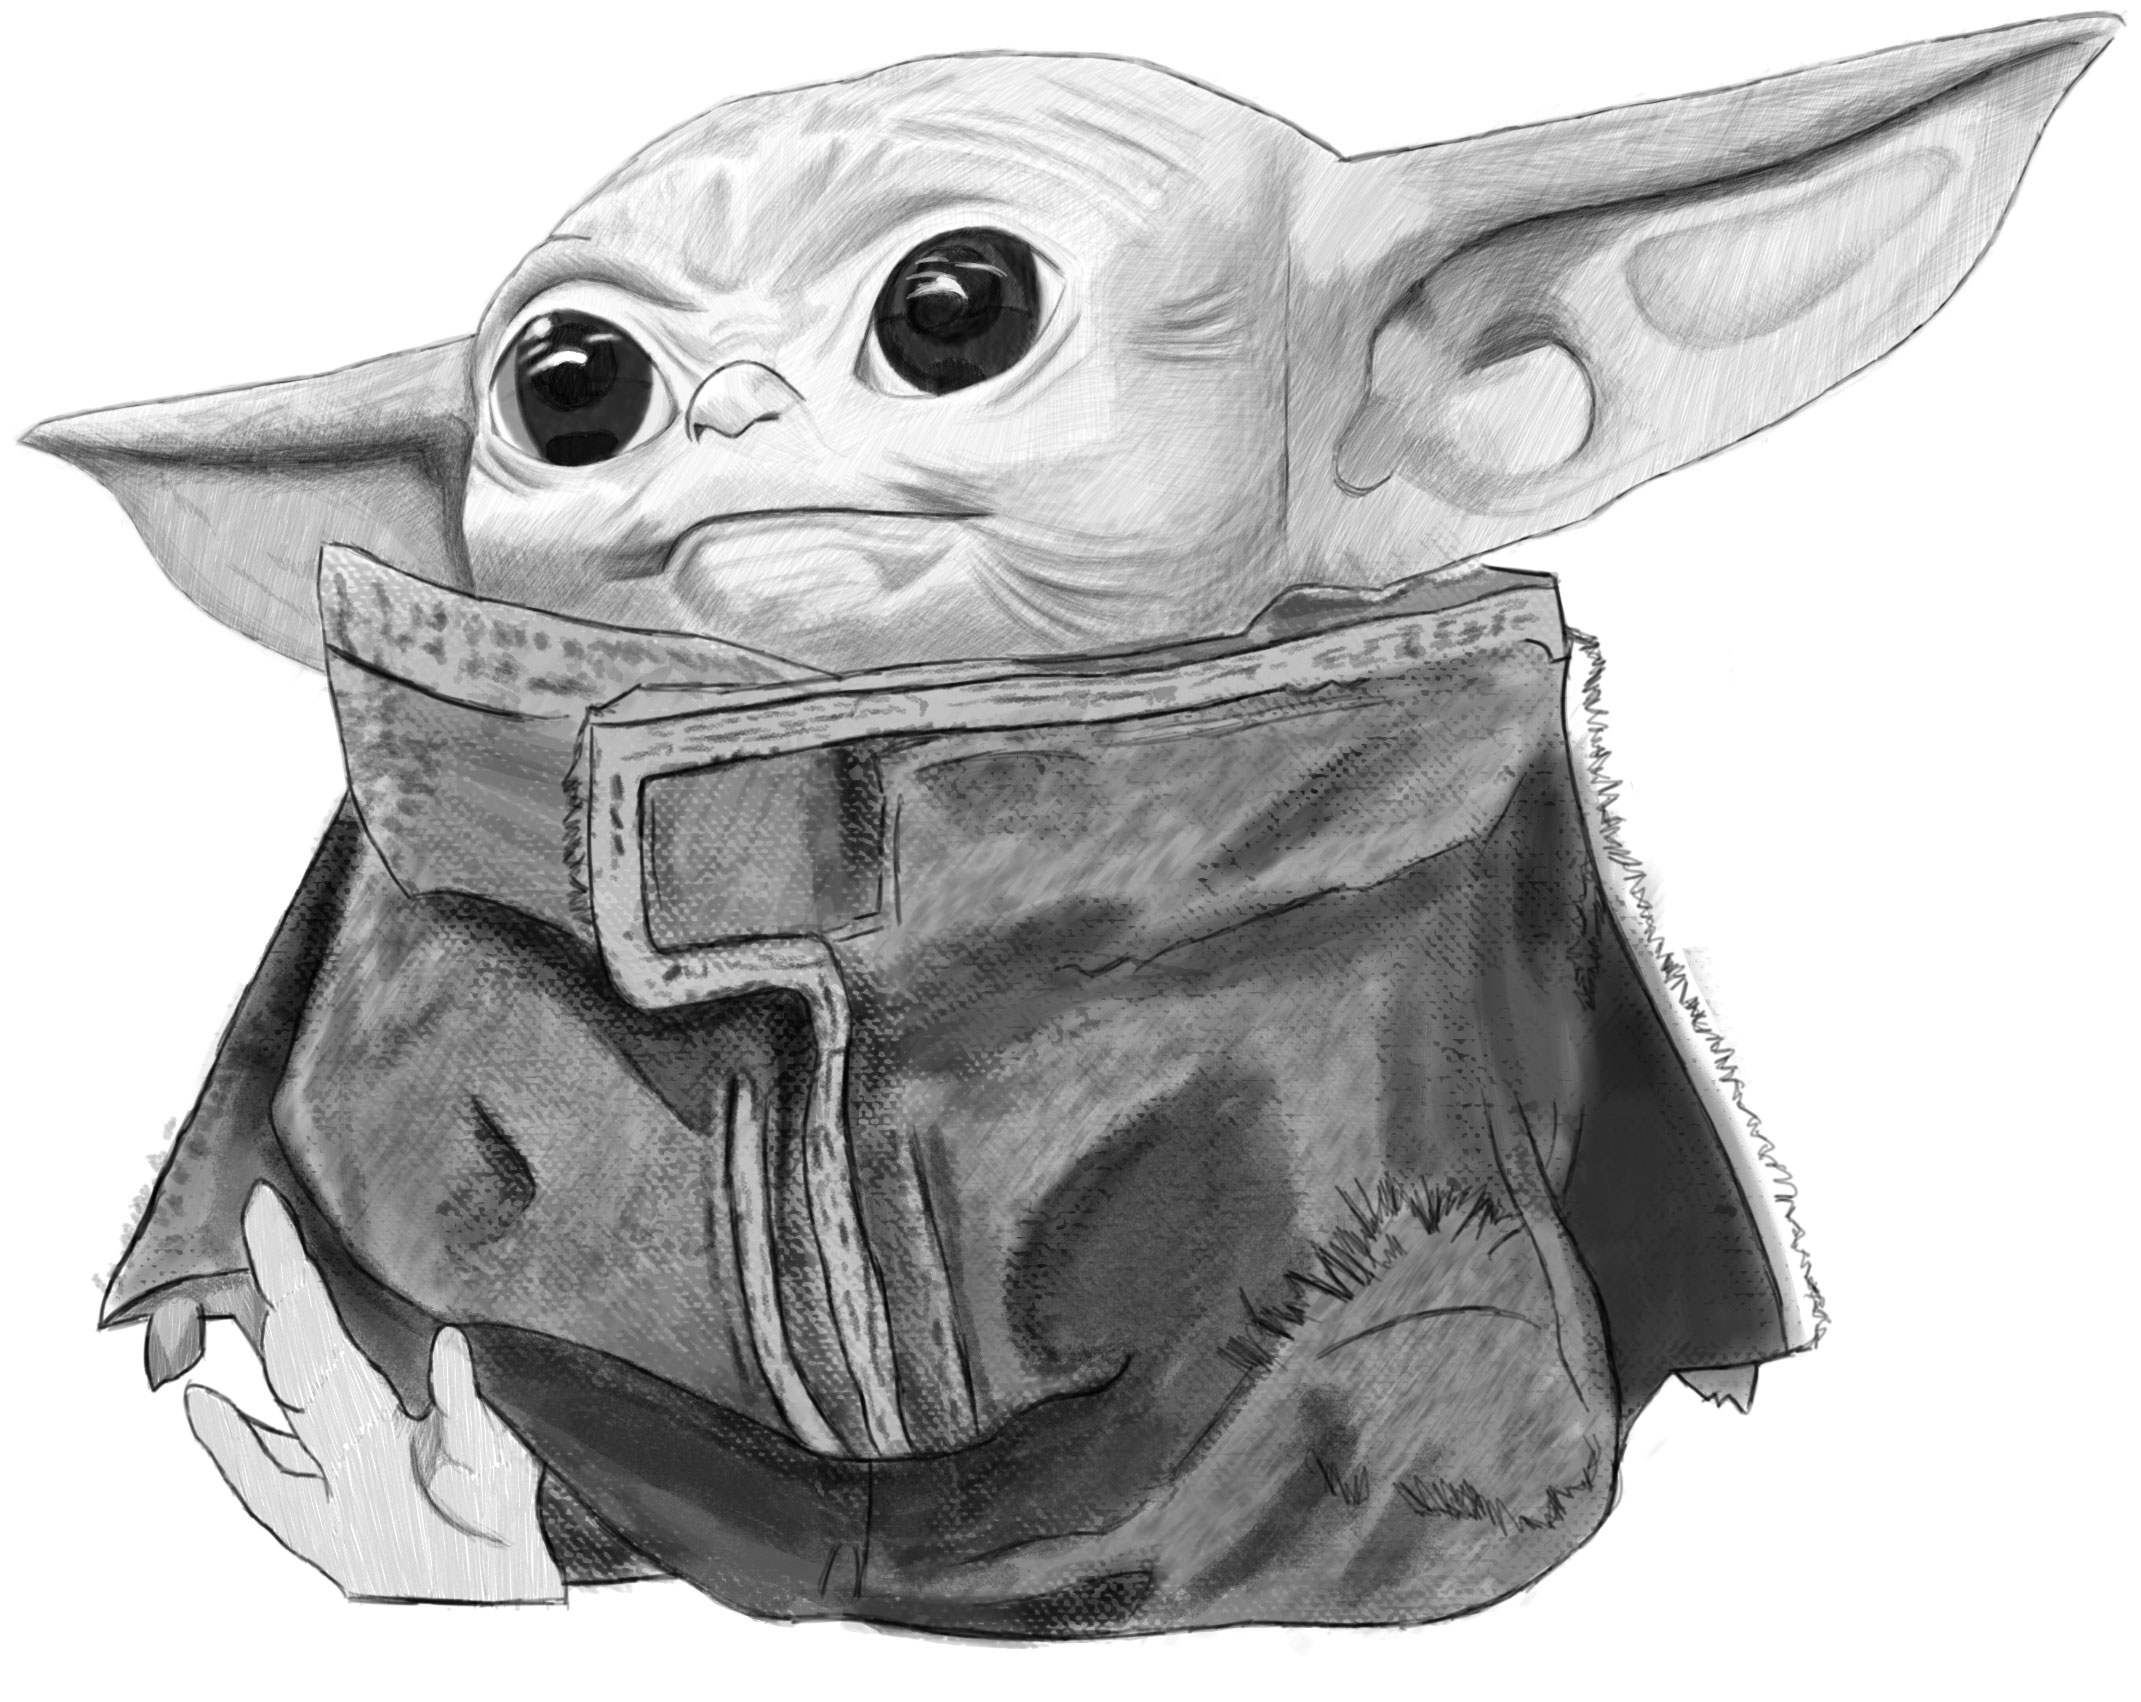 How to Draw Baby Yoda from The Mandalorian (Realistic) - Easy Step